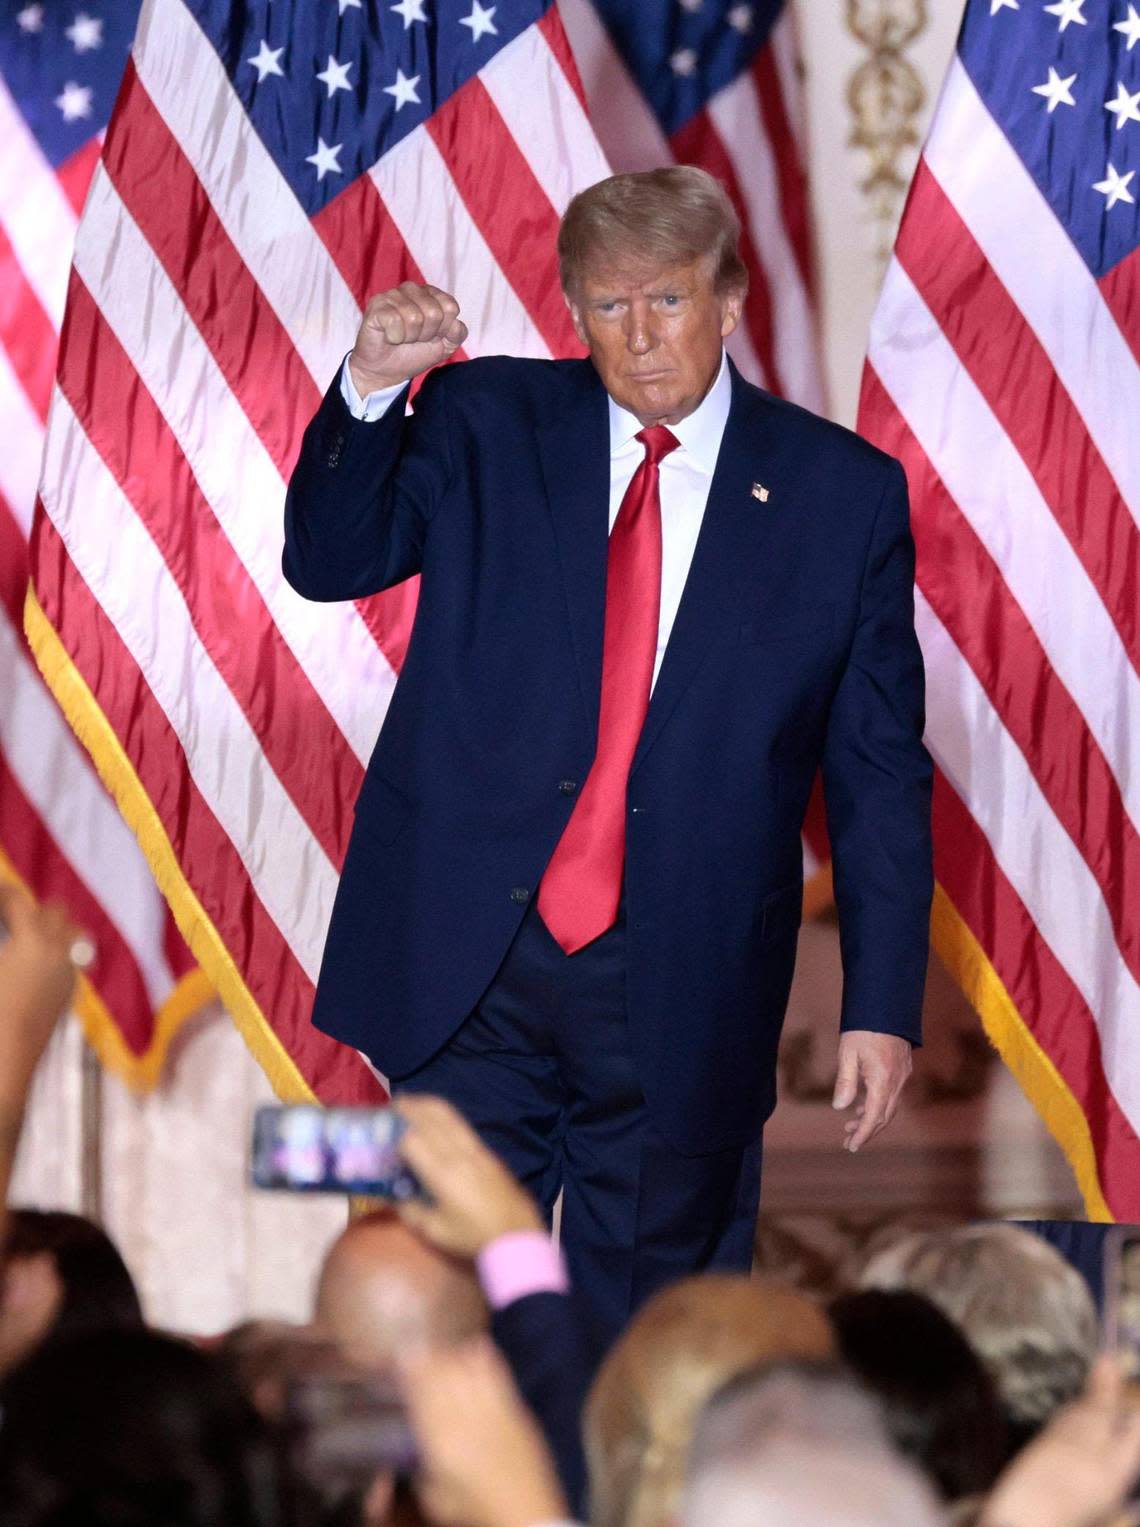 Former President Donald Trump pumps his fist as he reacts to the crowd after he announced his bid for another term as president from his Mar-a-Lago club in Palm Beach, Florida, on Tuesday, Nov. 15, 2022.